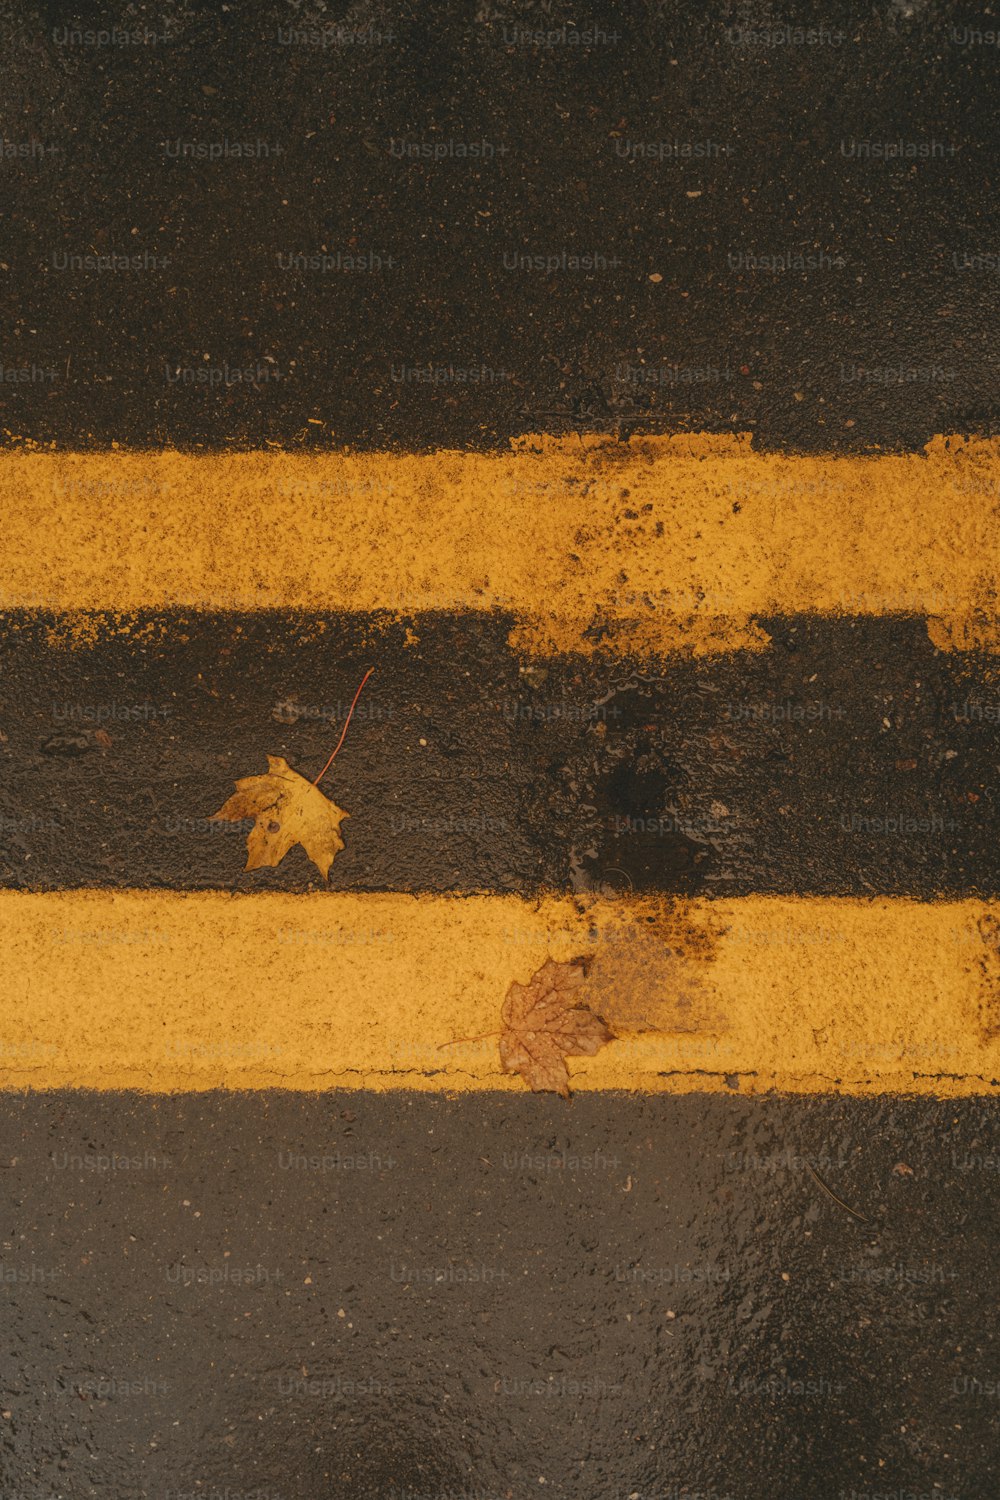 a yellow line painted on the side of a road